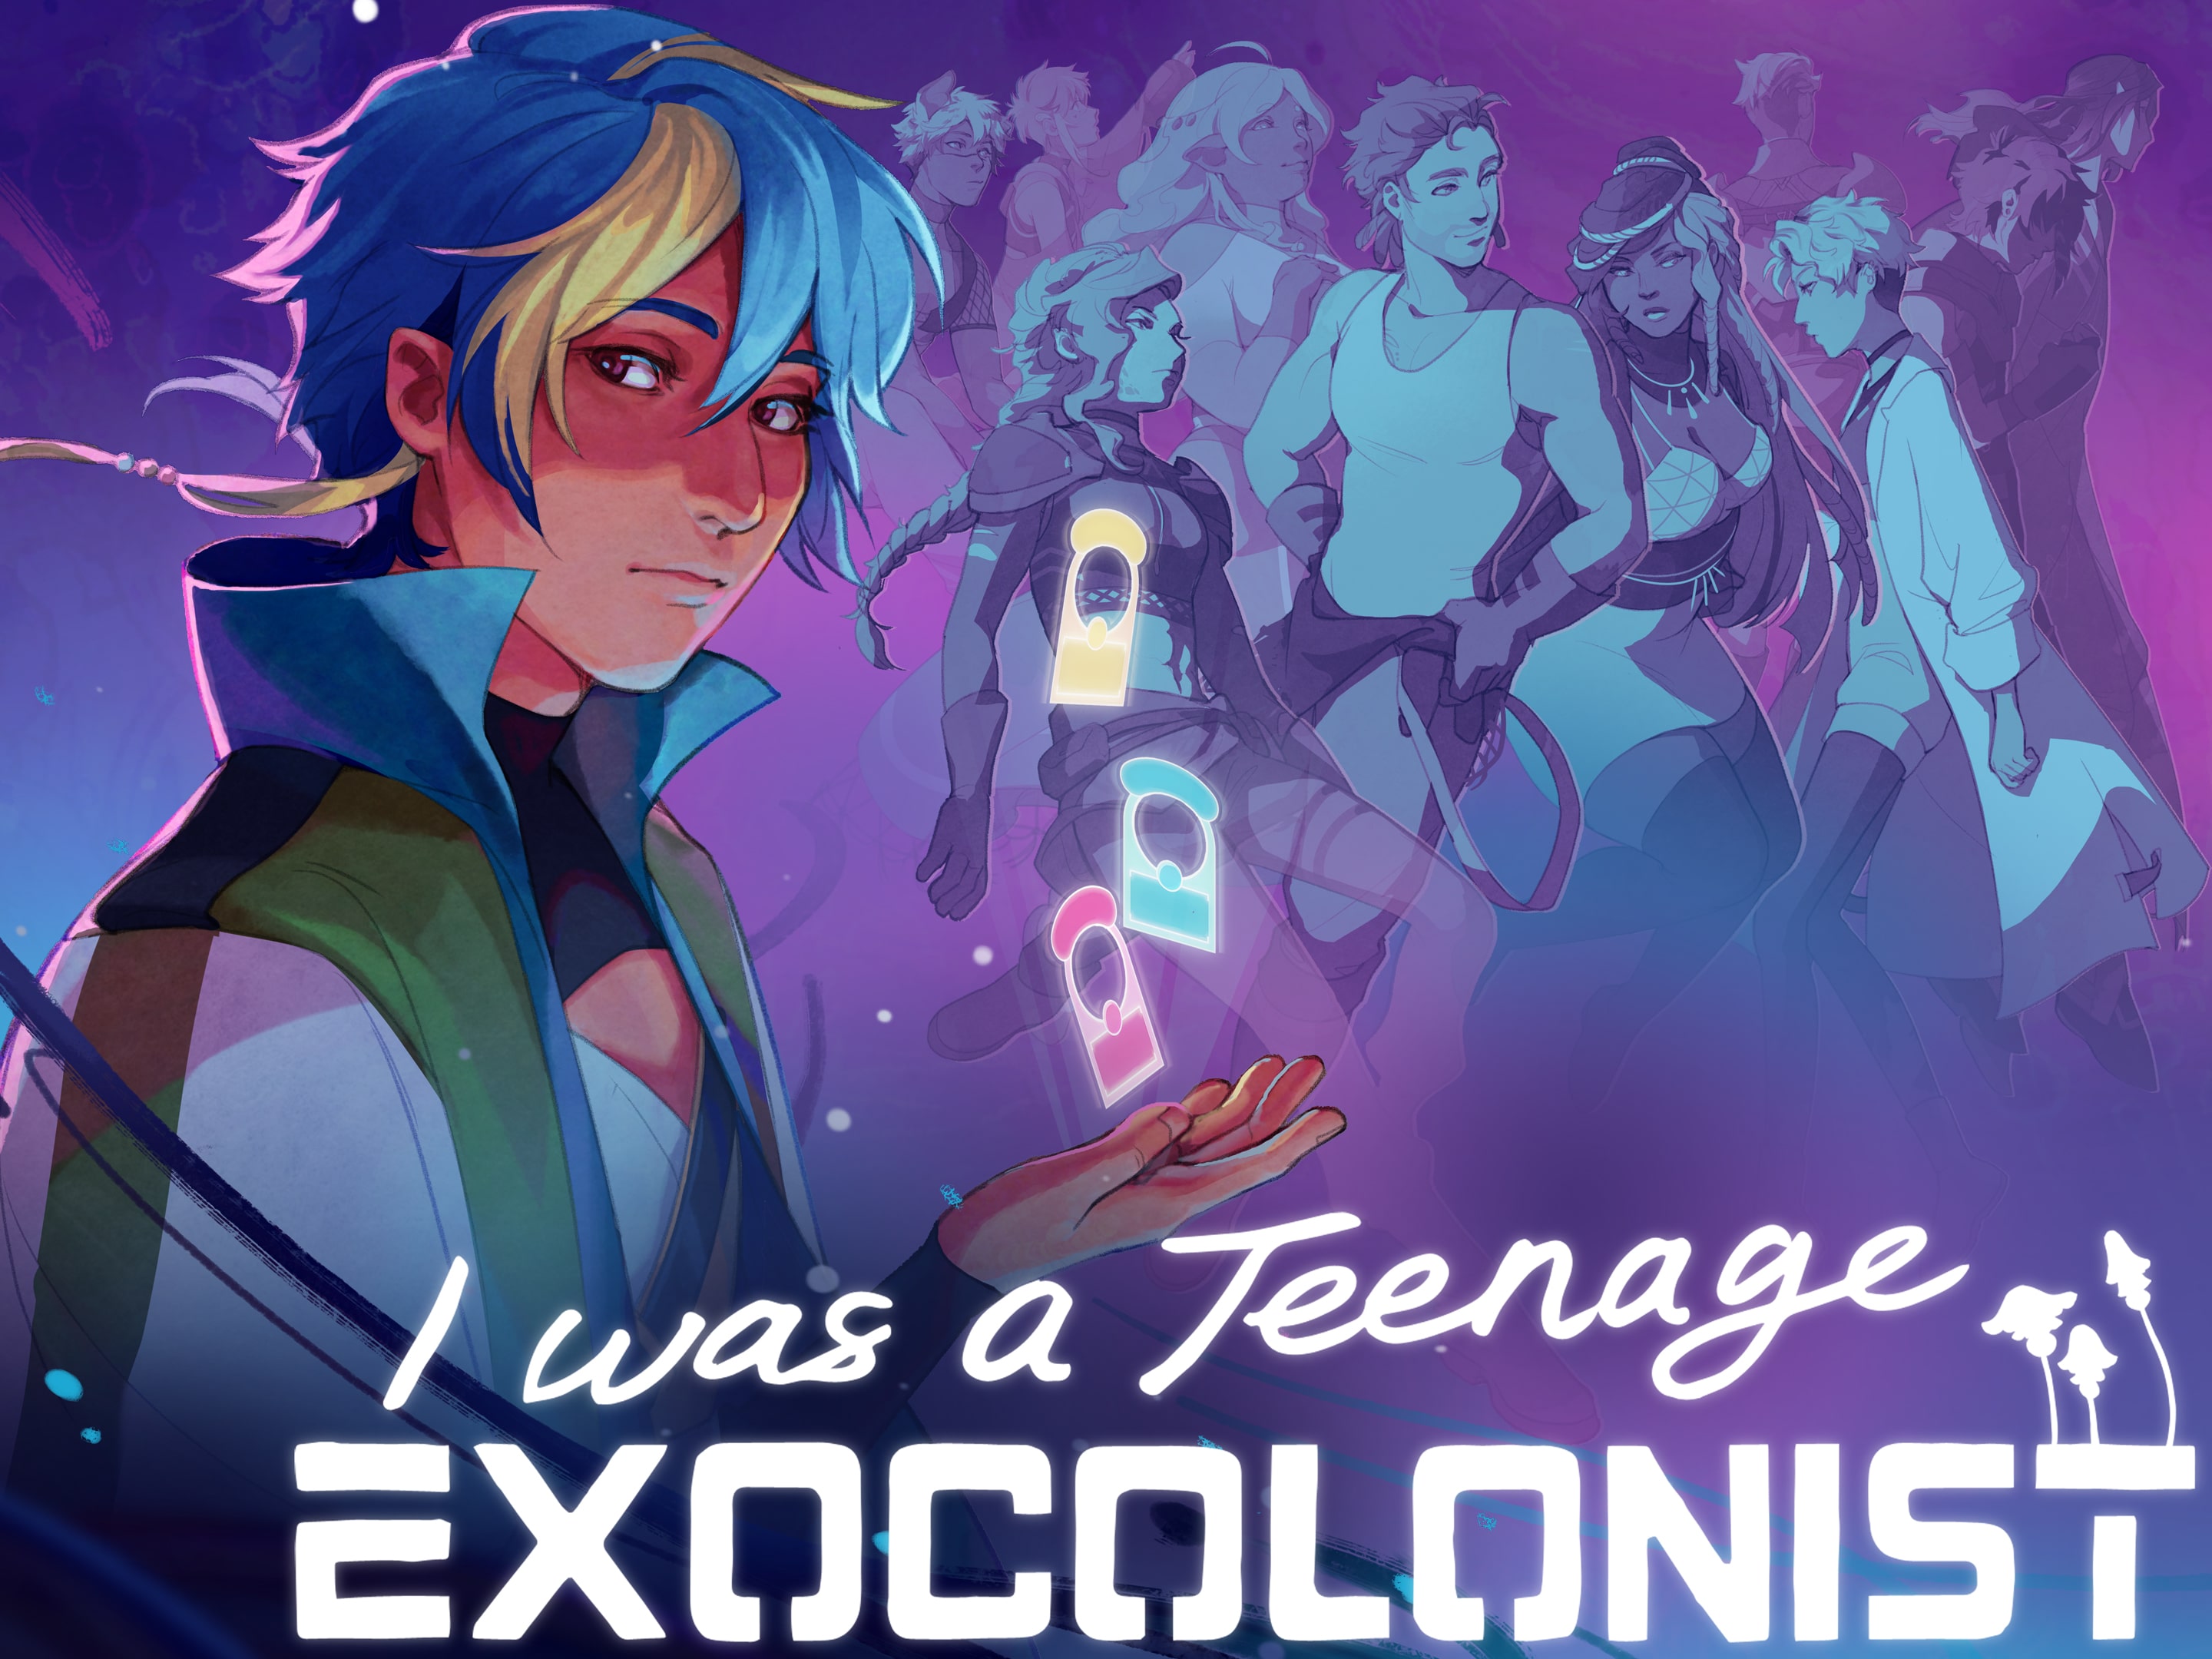 I Was a Teenage Exocolonist Free Download